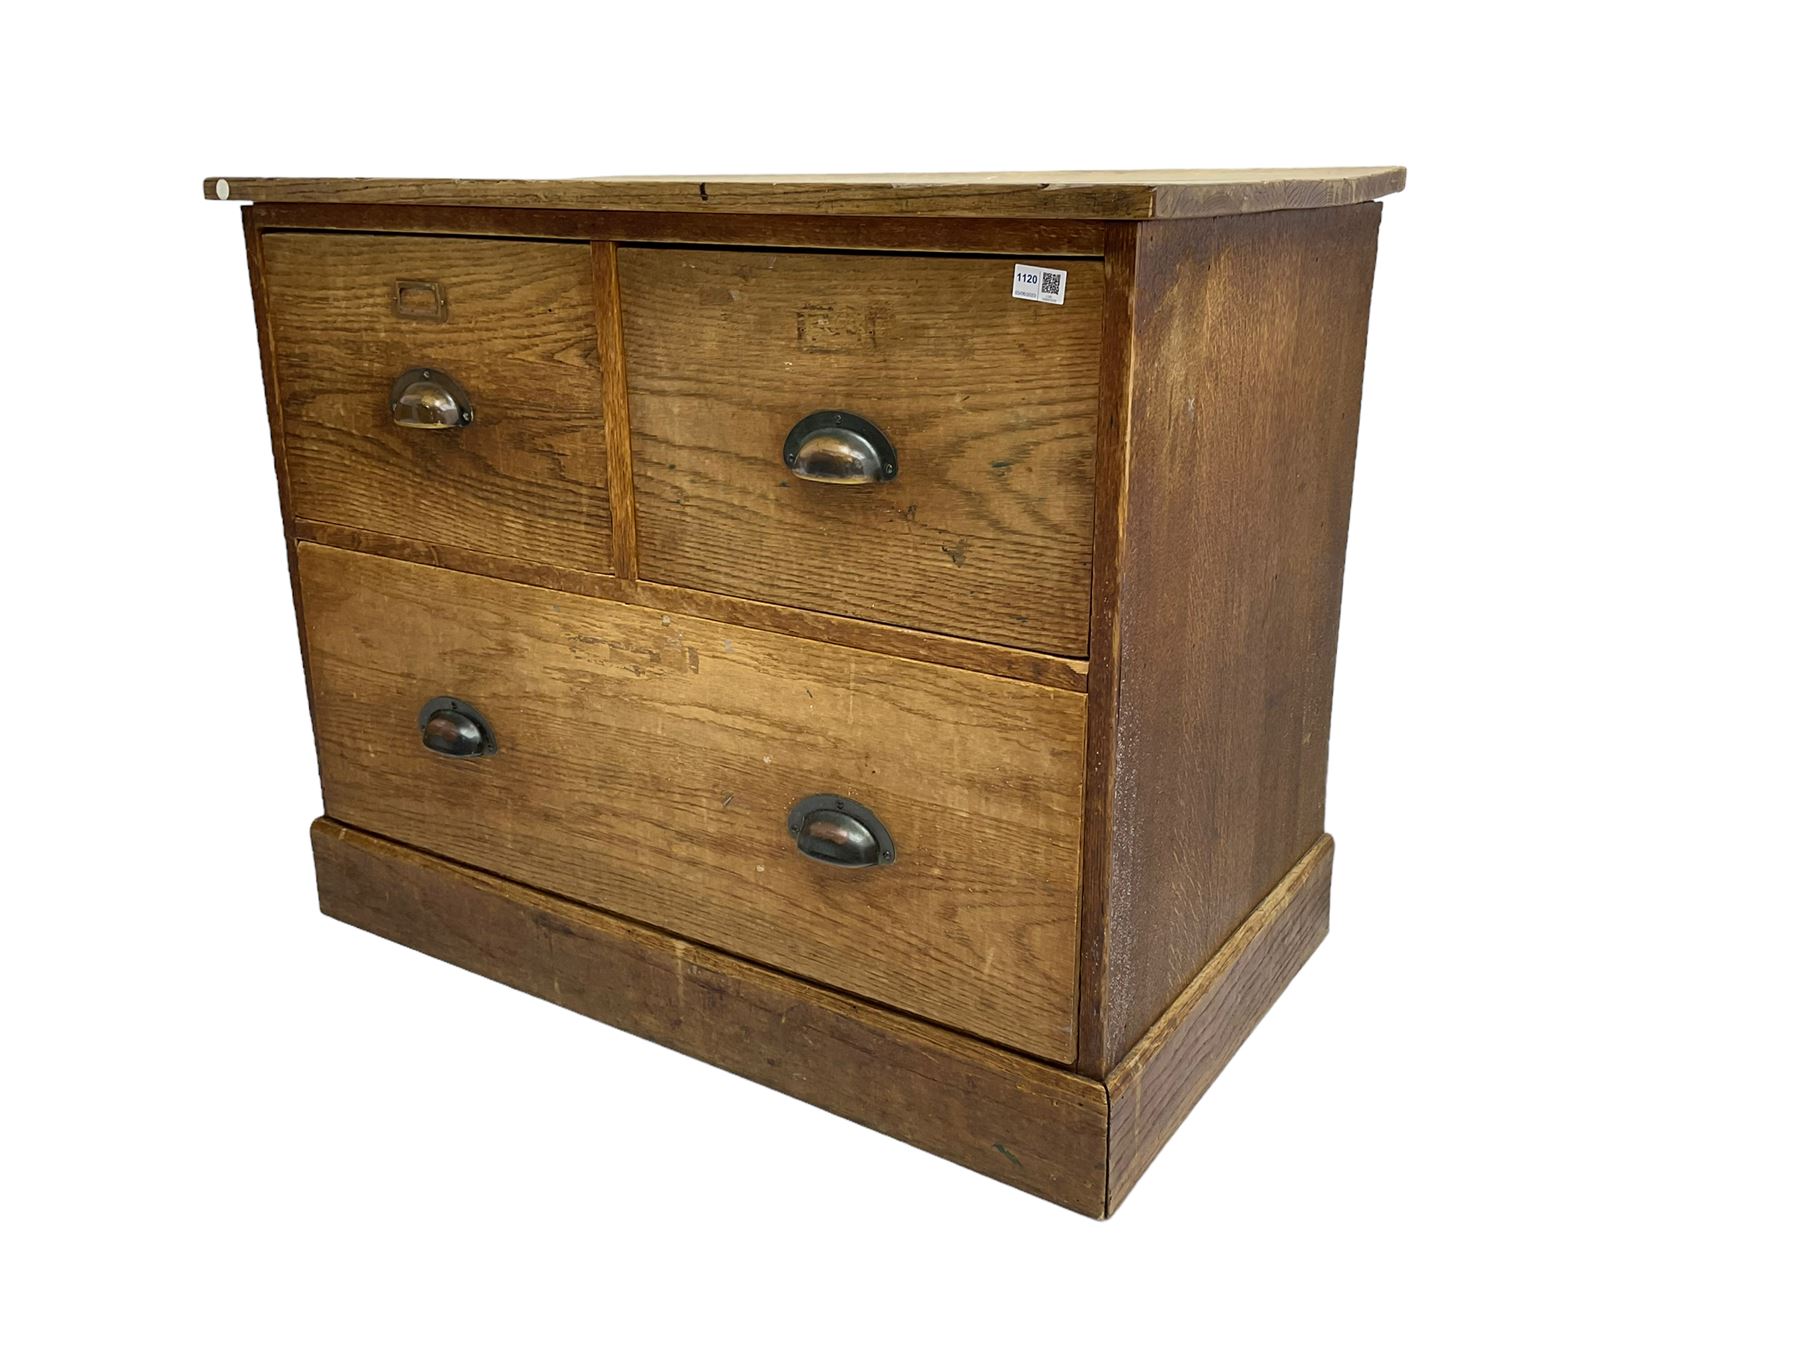 Early to mid-20th century oak chest - Image 3 of 7